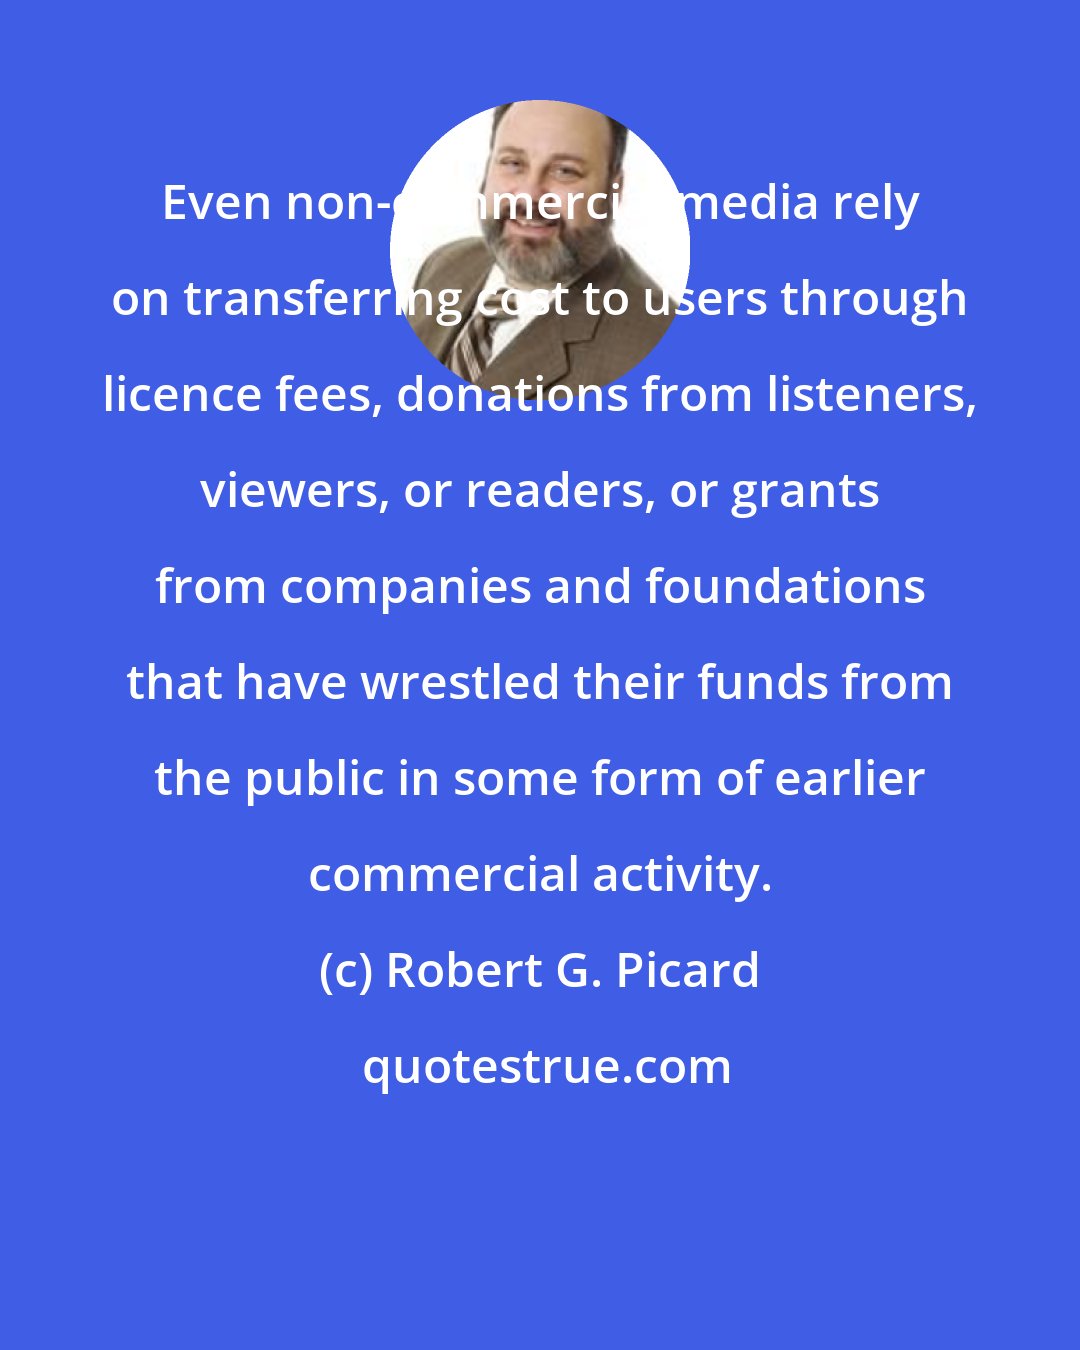 Robert G. Picard: Even non-commercial media rely on transferring cost to users through licence fees, donations from listeners, viewers, or readers, or grants from companies and foundations that have wrestled their funds from the public in some form of earlier commercial activity.